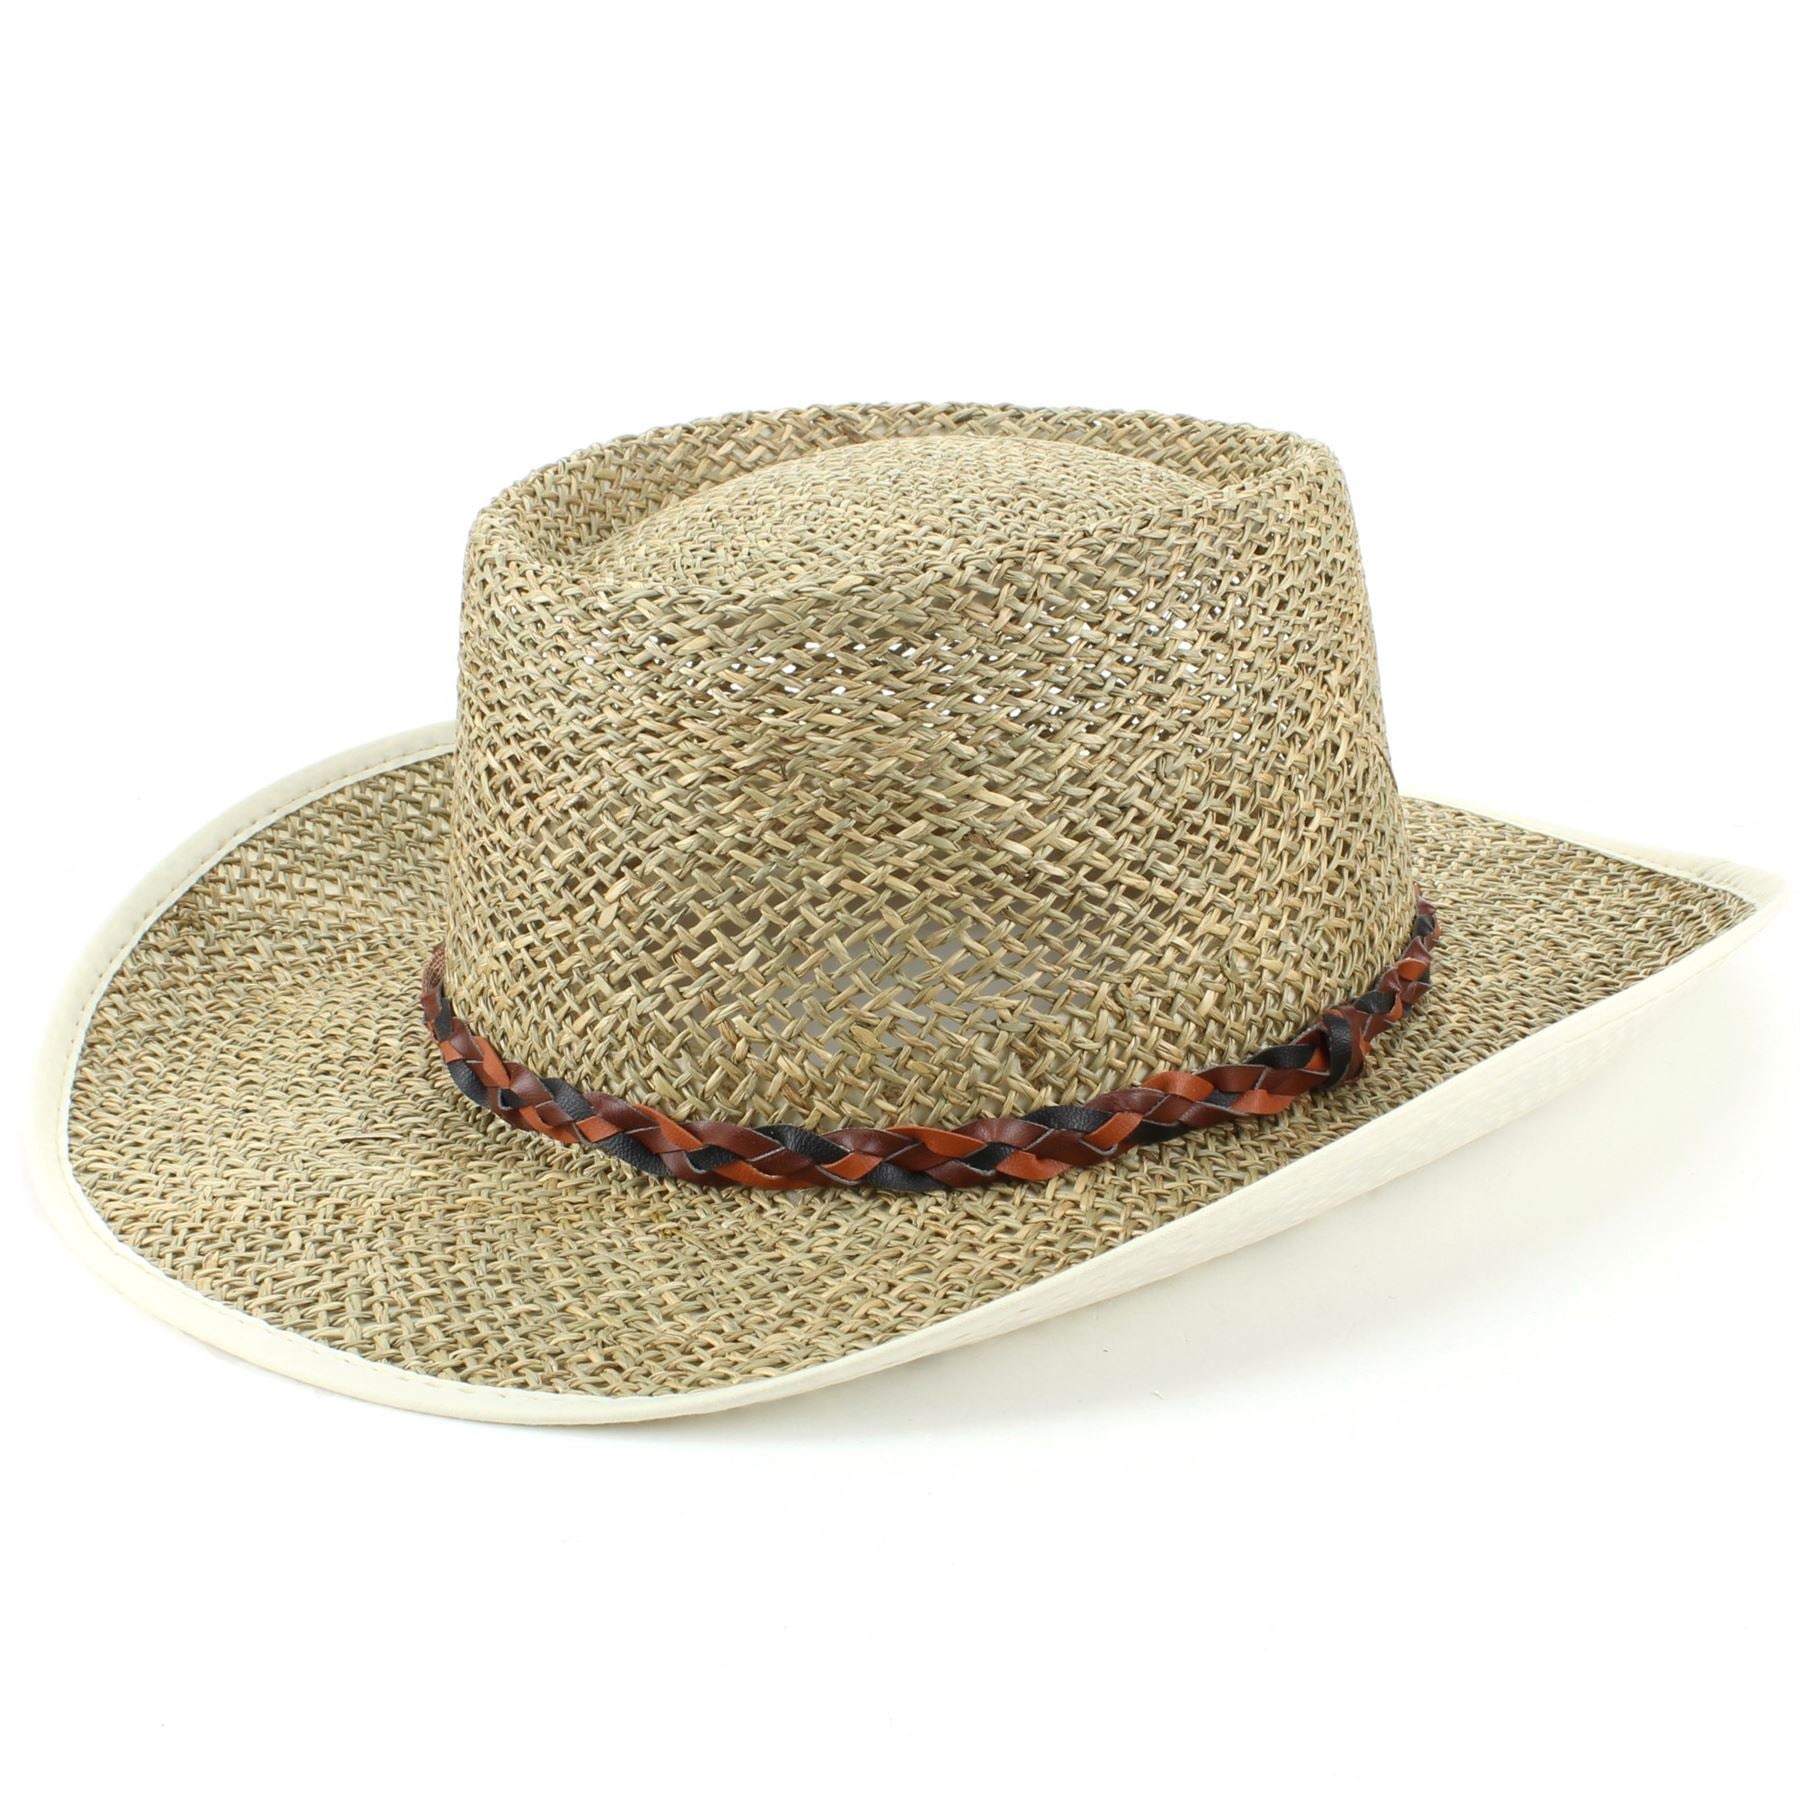 Men's Seagrass Straw Summer Hat – The Hat Company